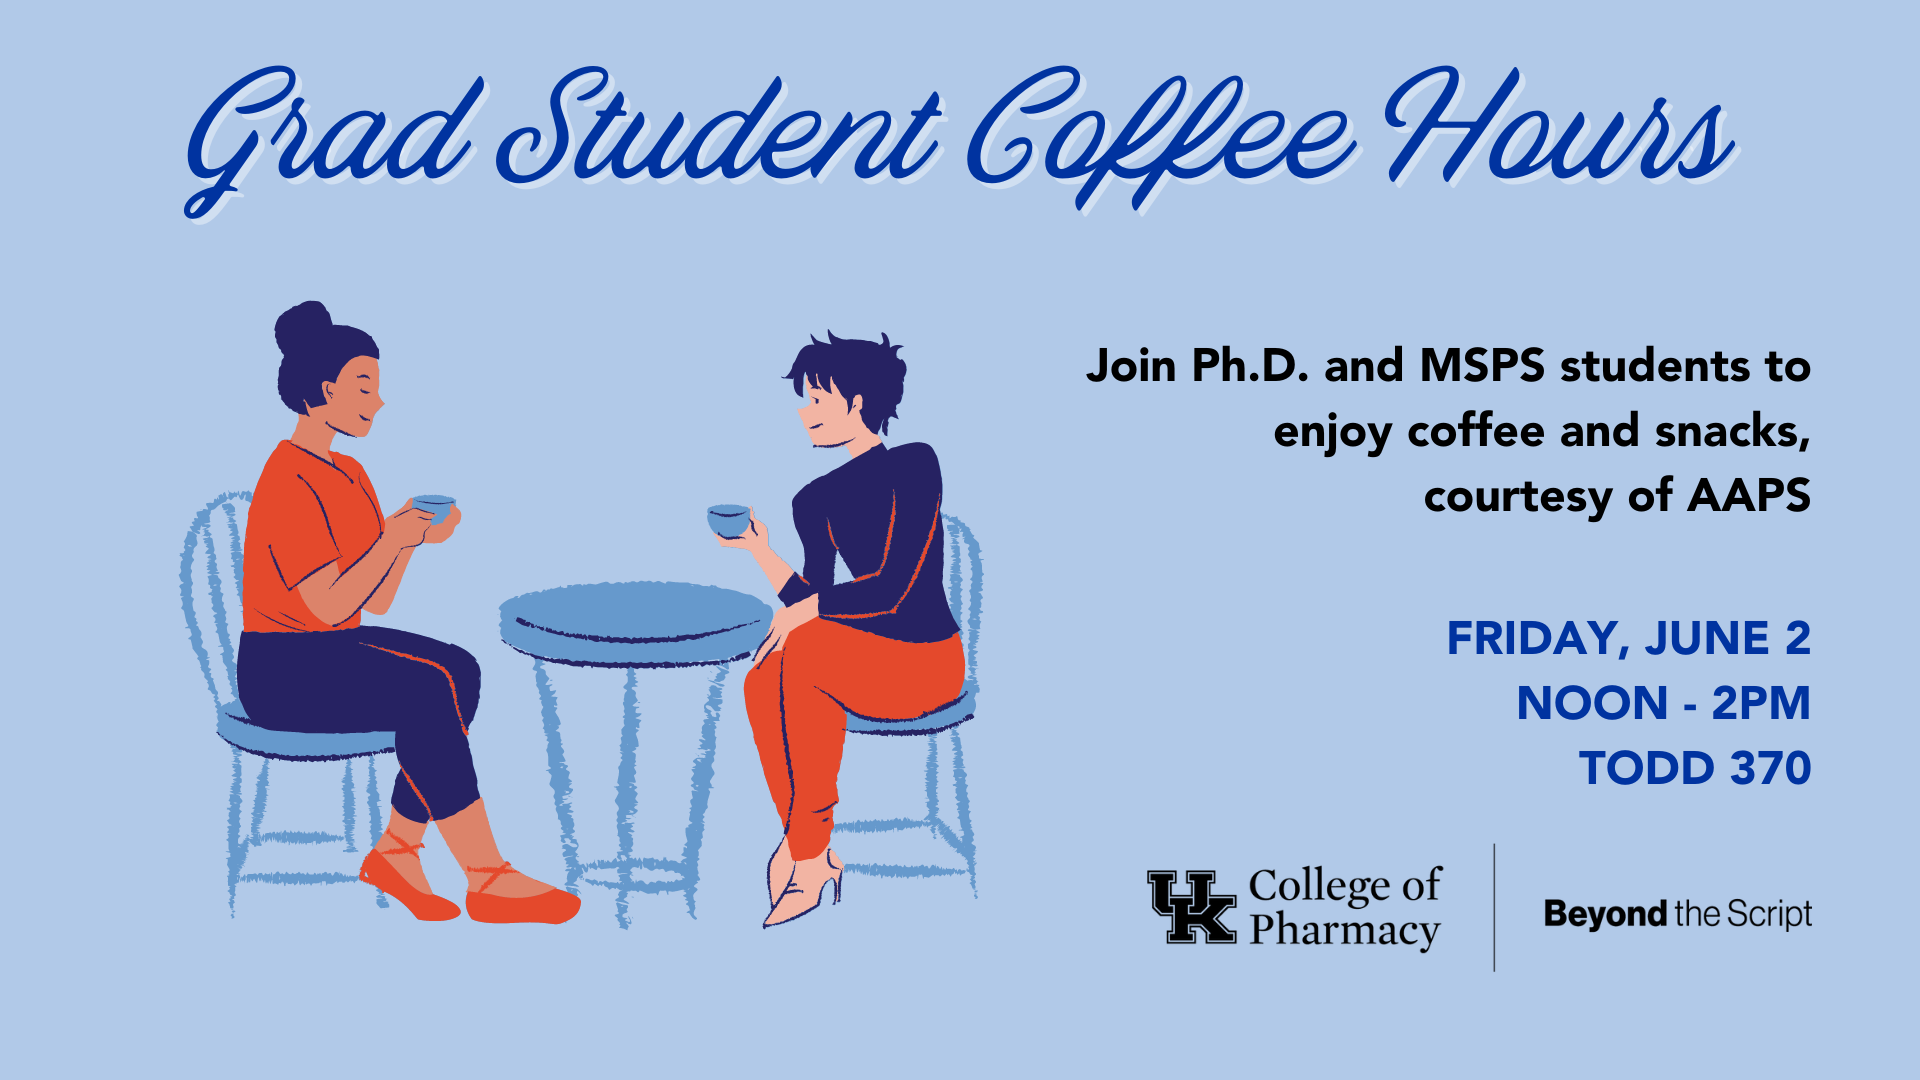 Grad students coffee hours announcement